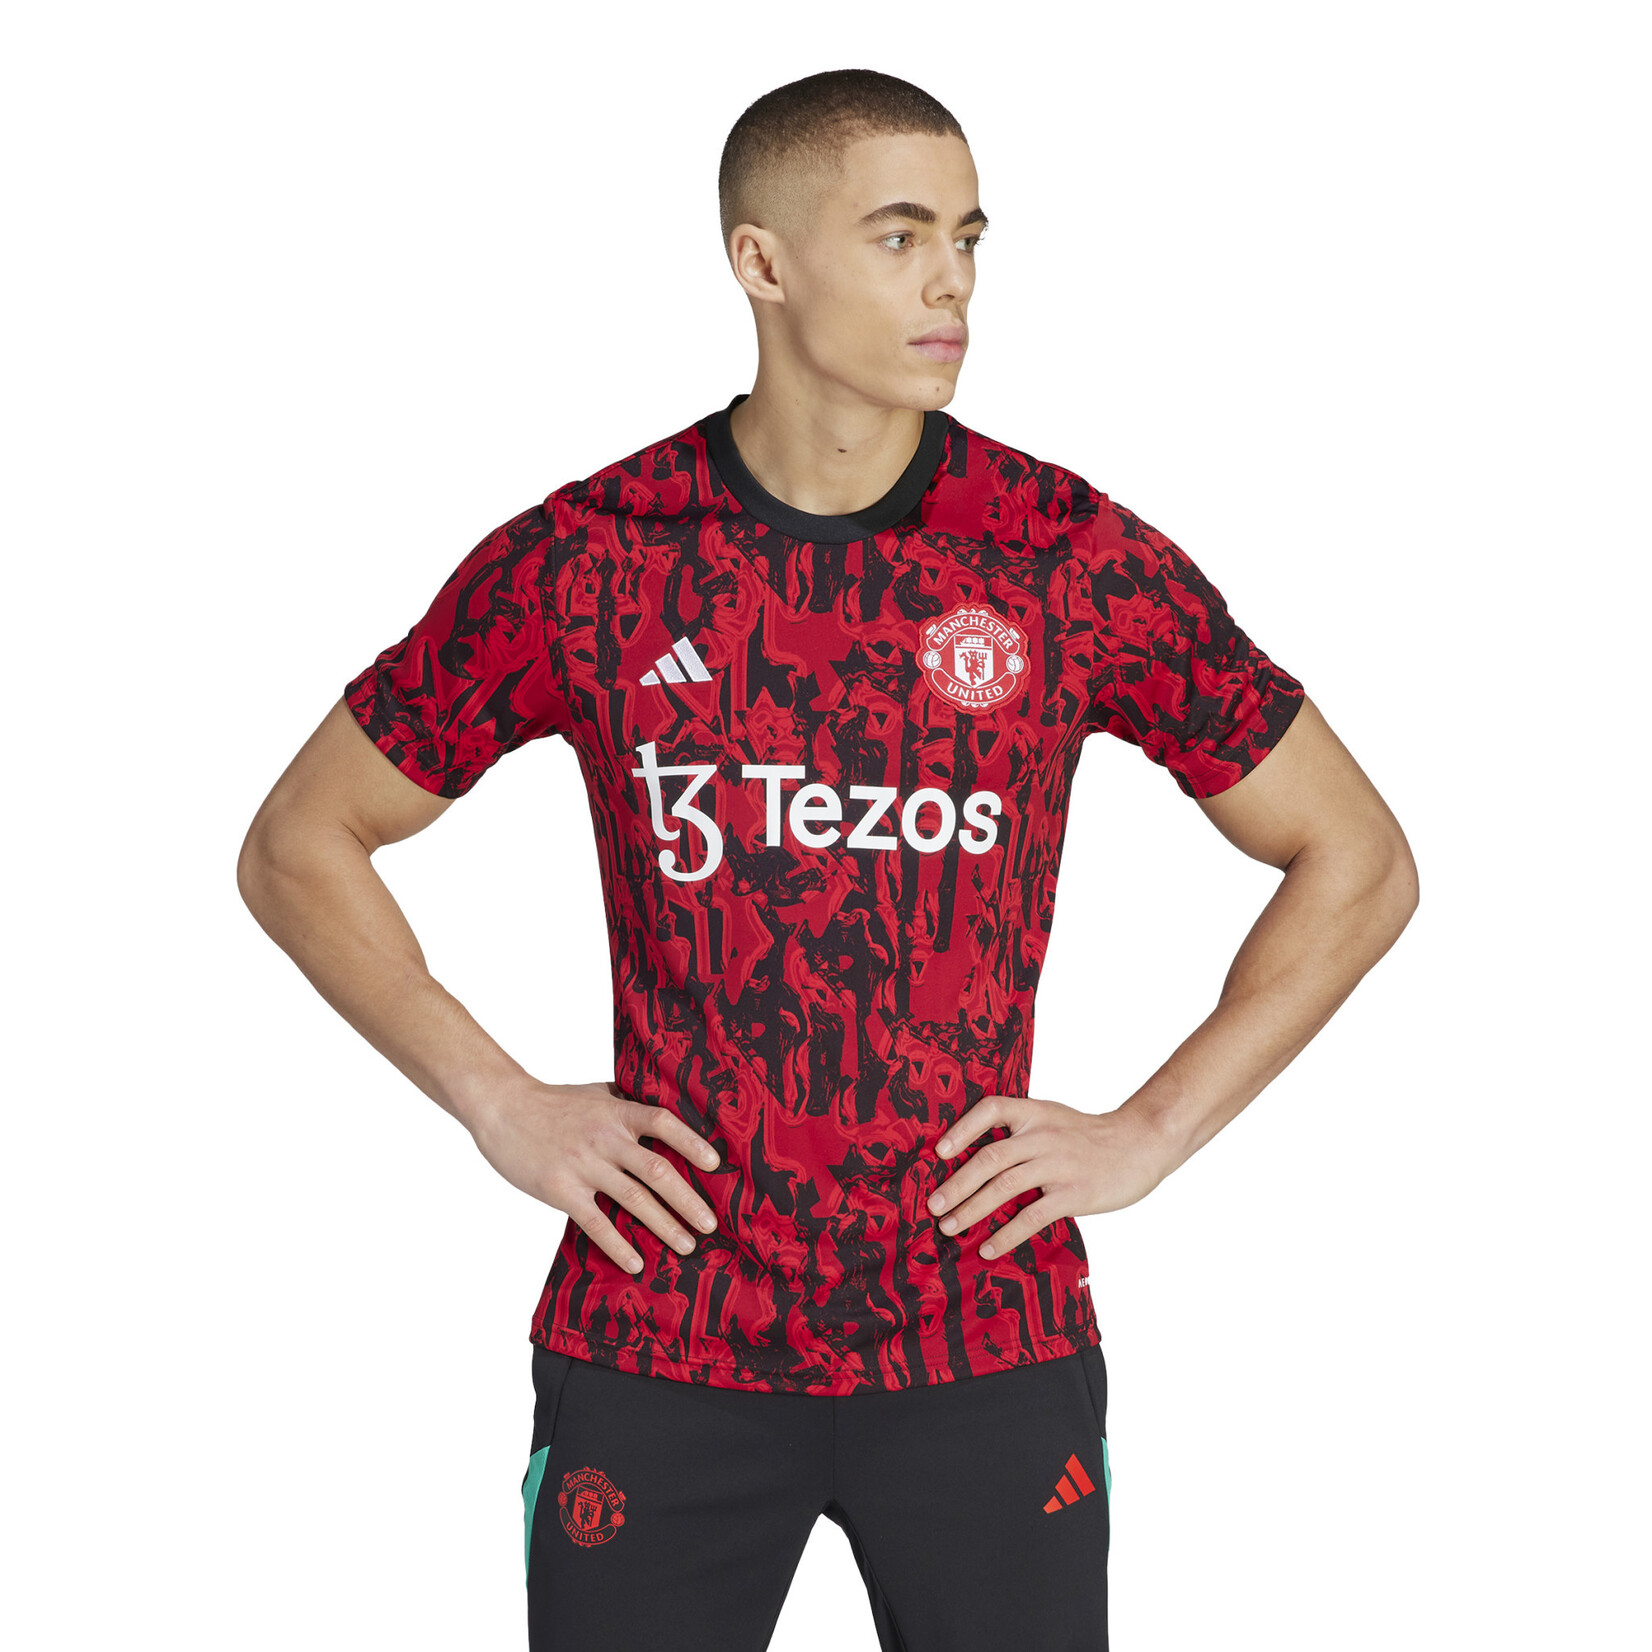 ADIDAS MANCHESTER UNITED 23/24 PREMATCH JERSEY (RED/BLACK)